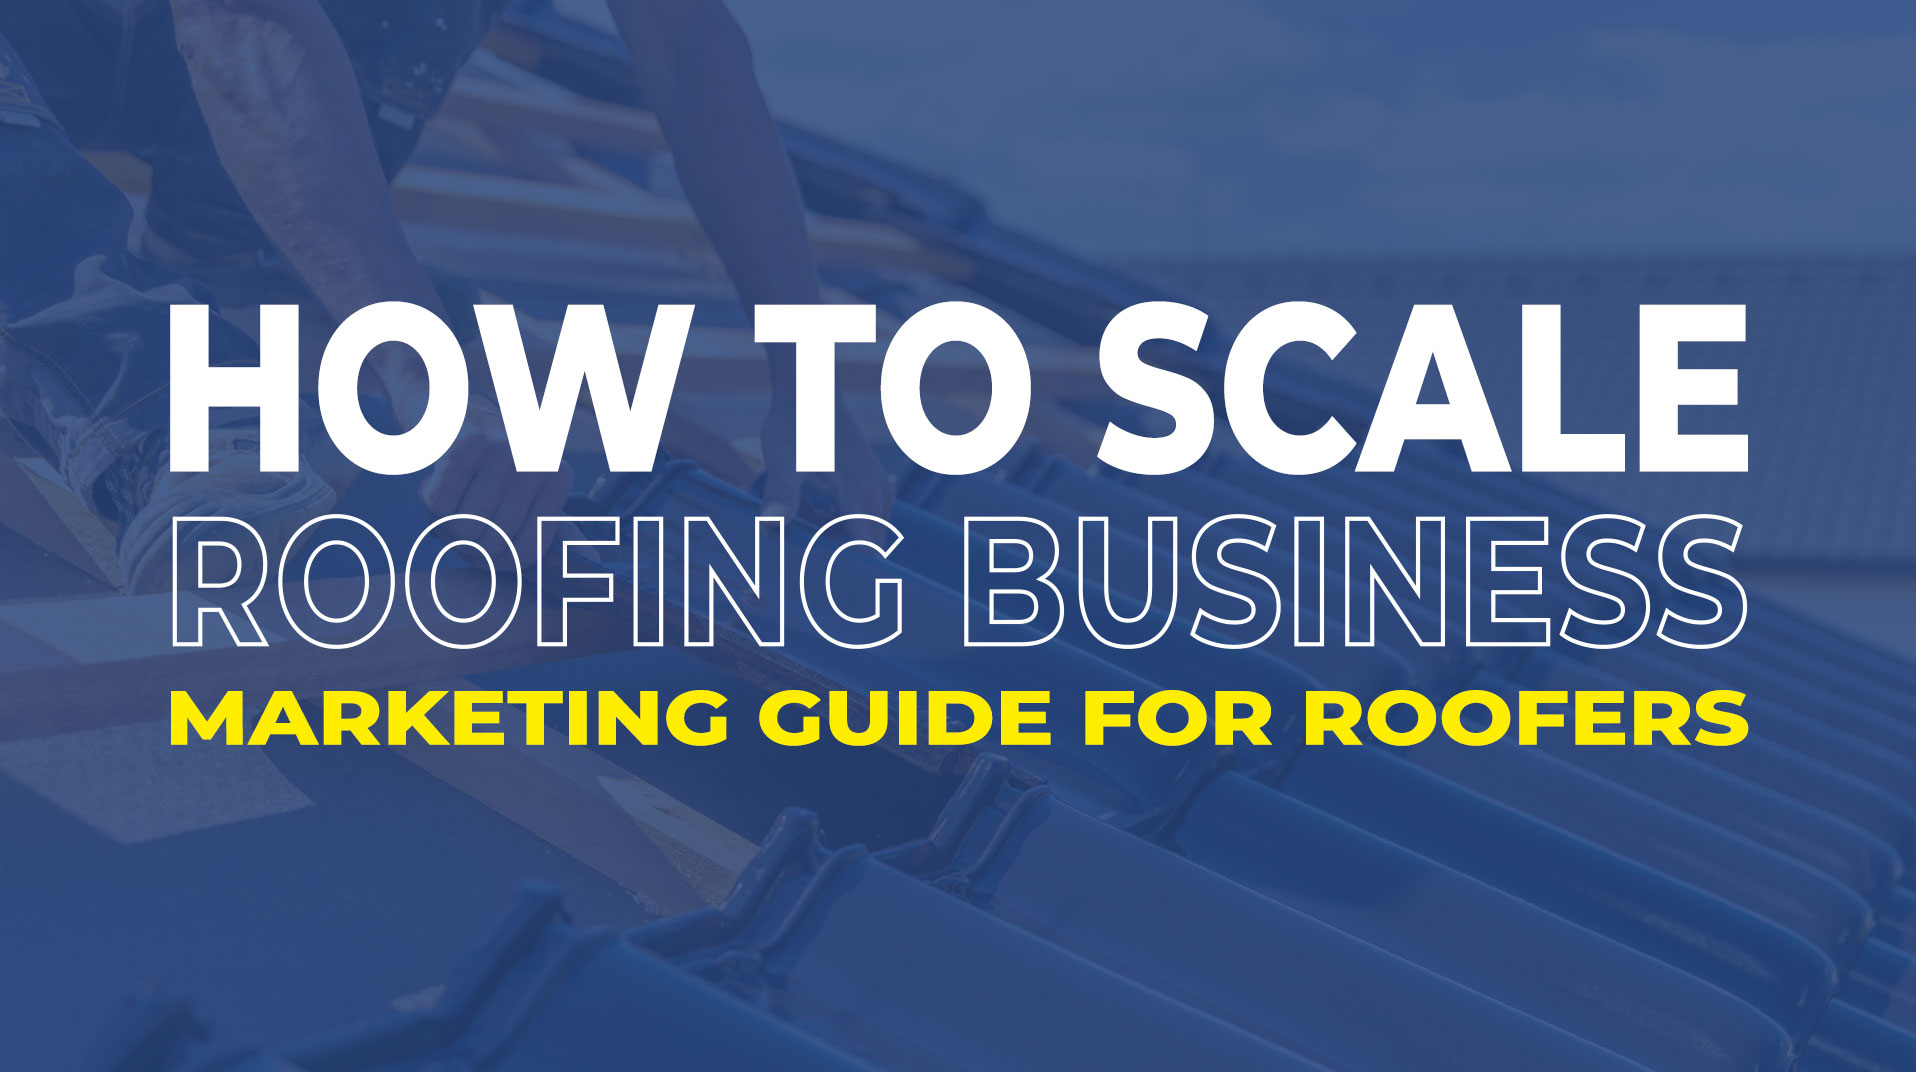 Scaling up Your Roofing Business – A Comprehensive Marketing Guide for Roofers